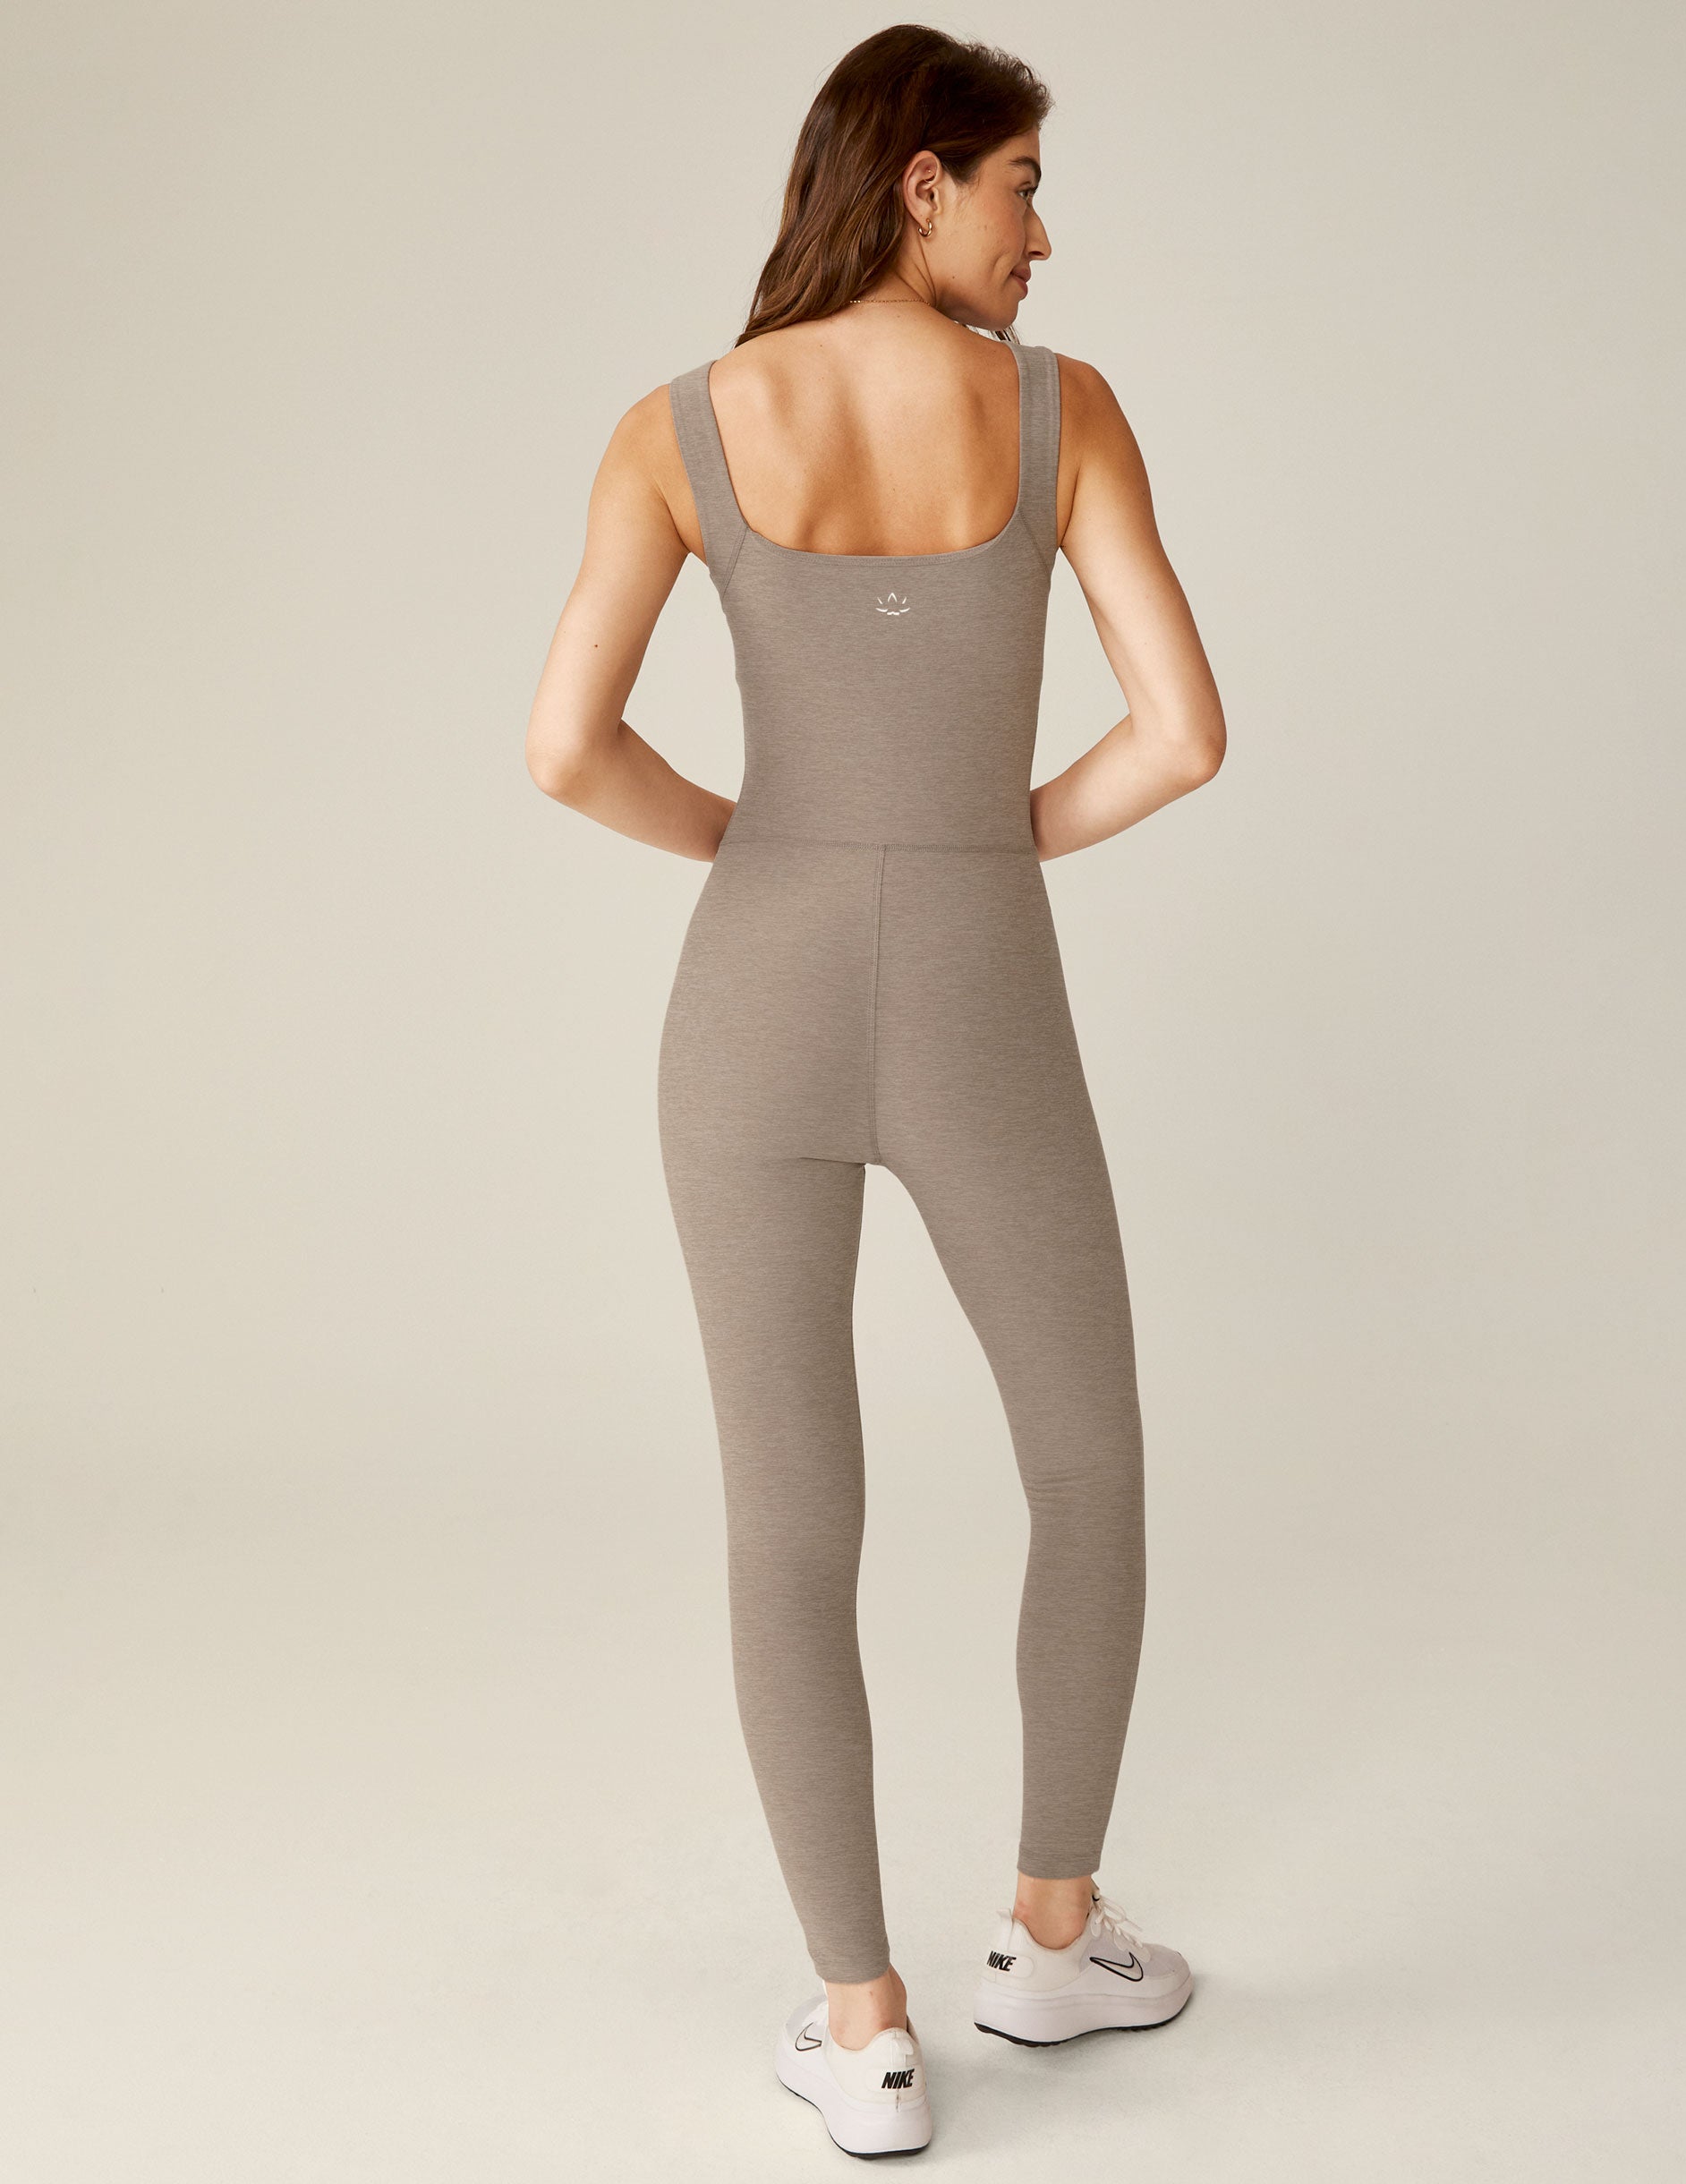 brown square neck tank top midi jumpsuit with white lining on the sides. 